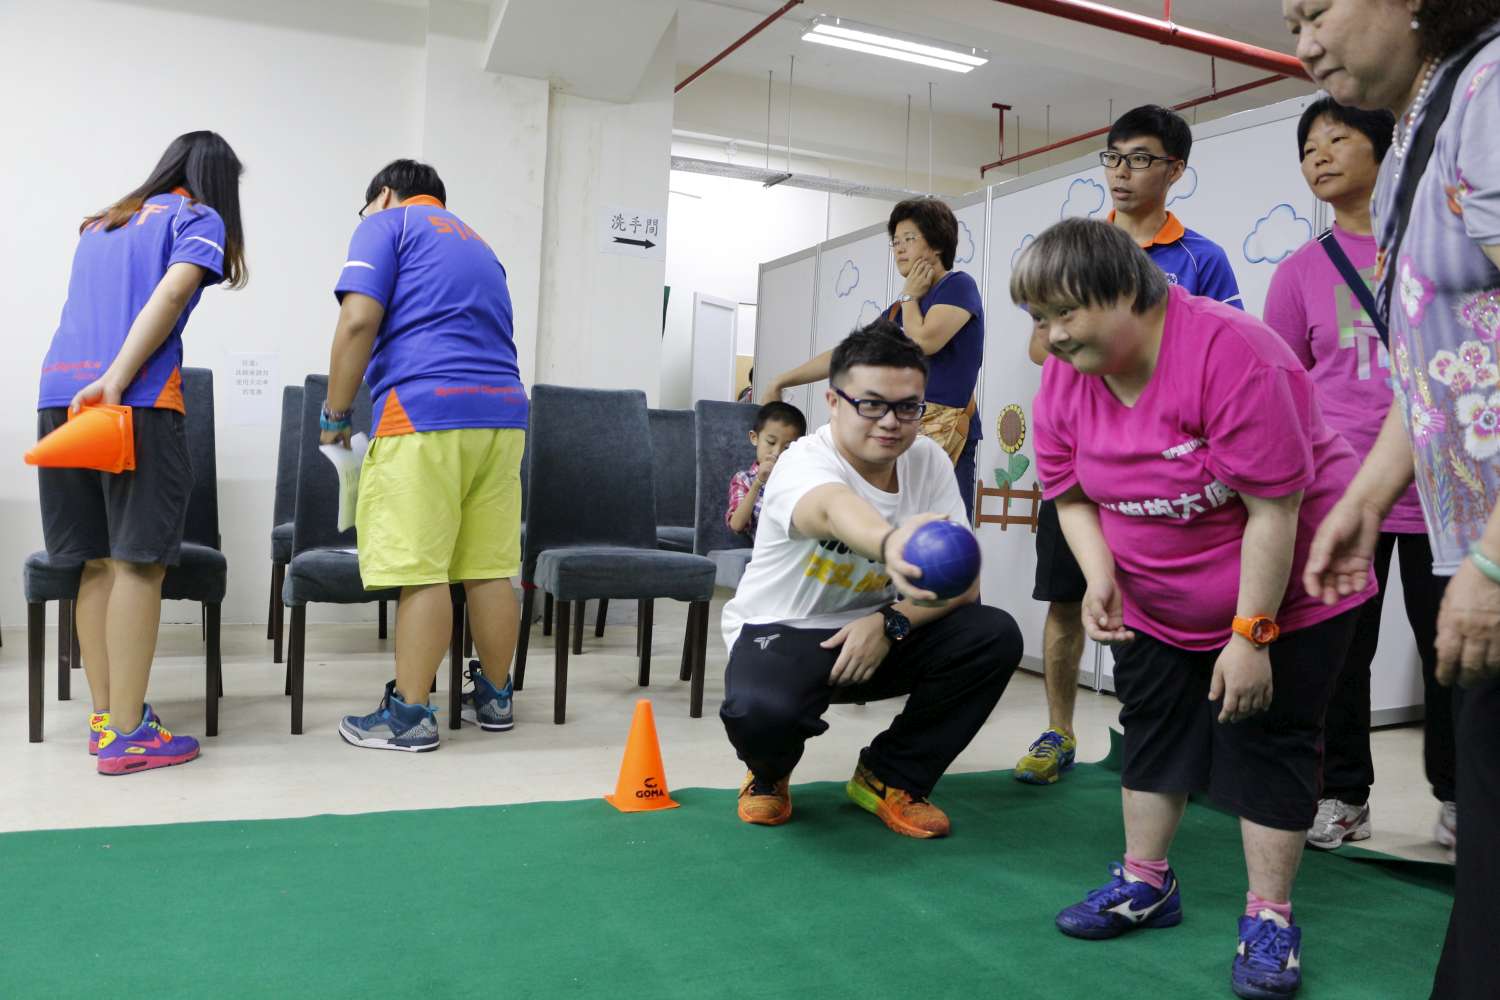 CESL Asia & MSO Bocce Game Event: Promoting Social Integration of Able-bodied and Disabled Persons